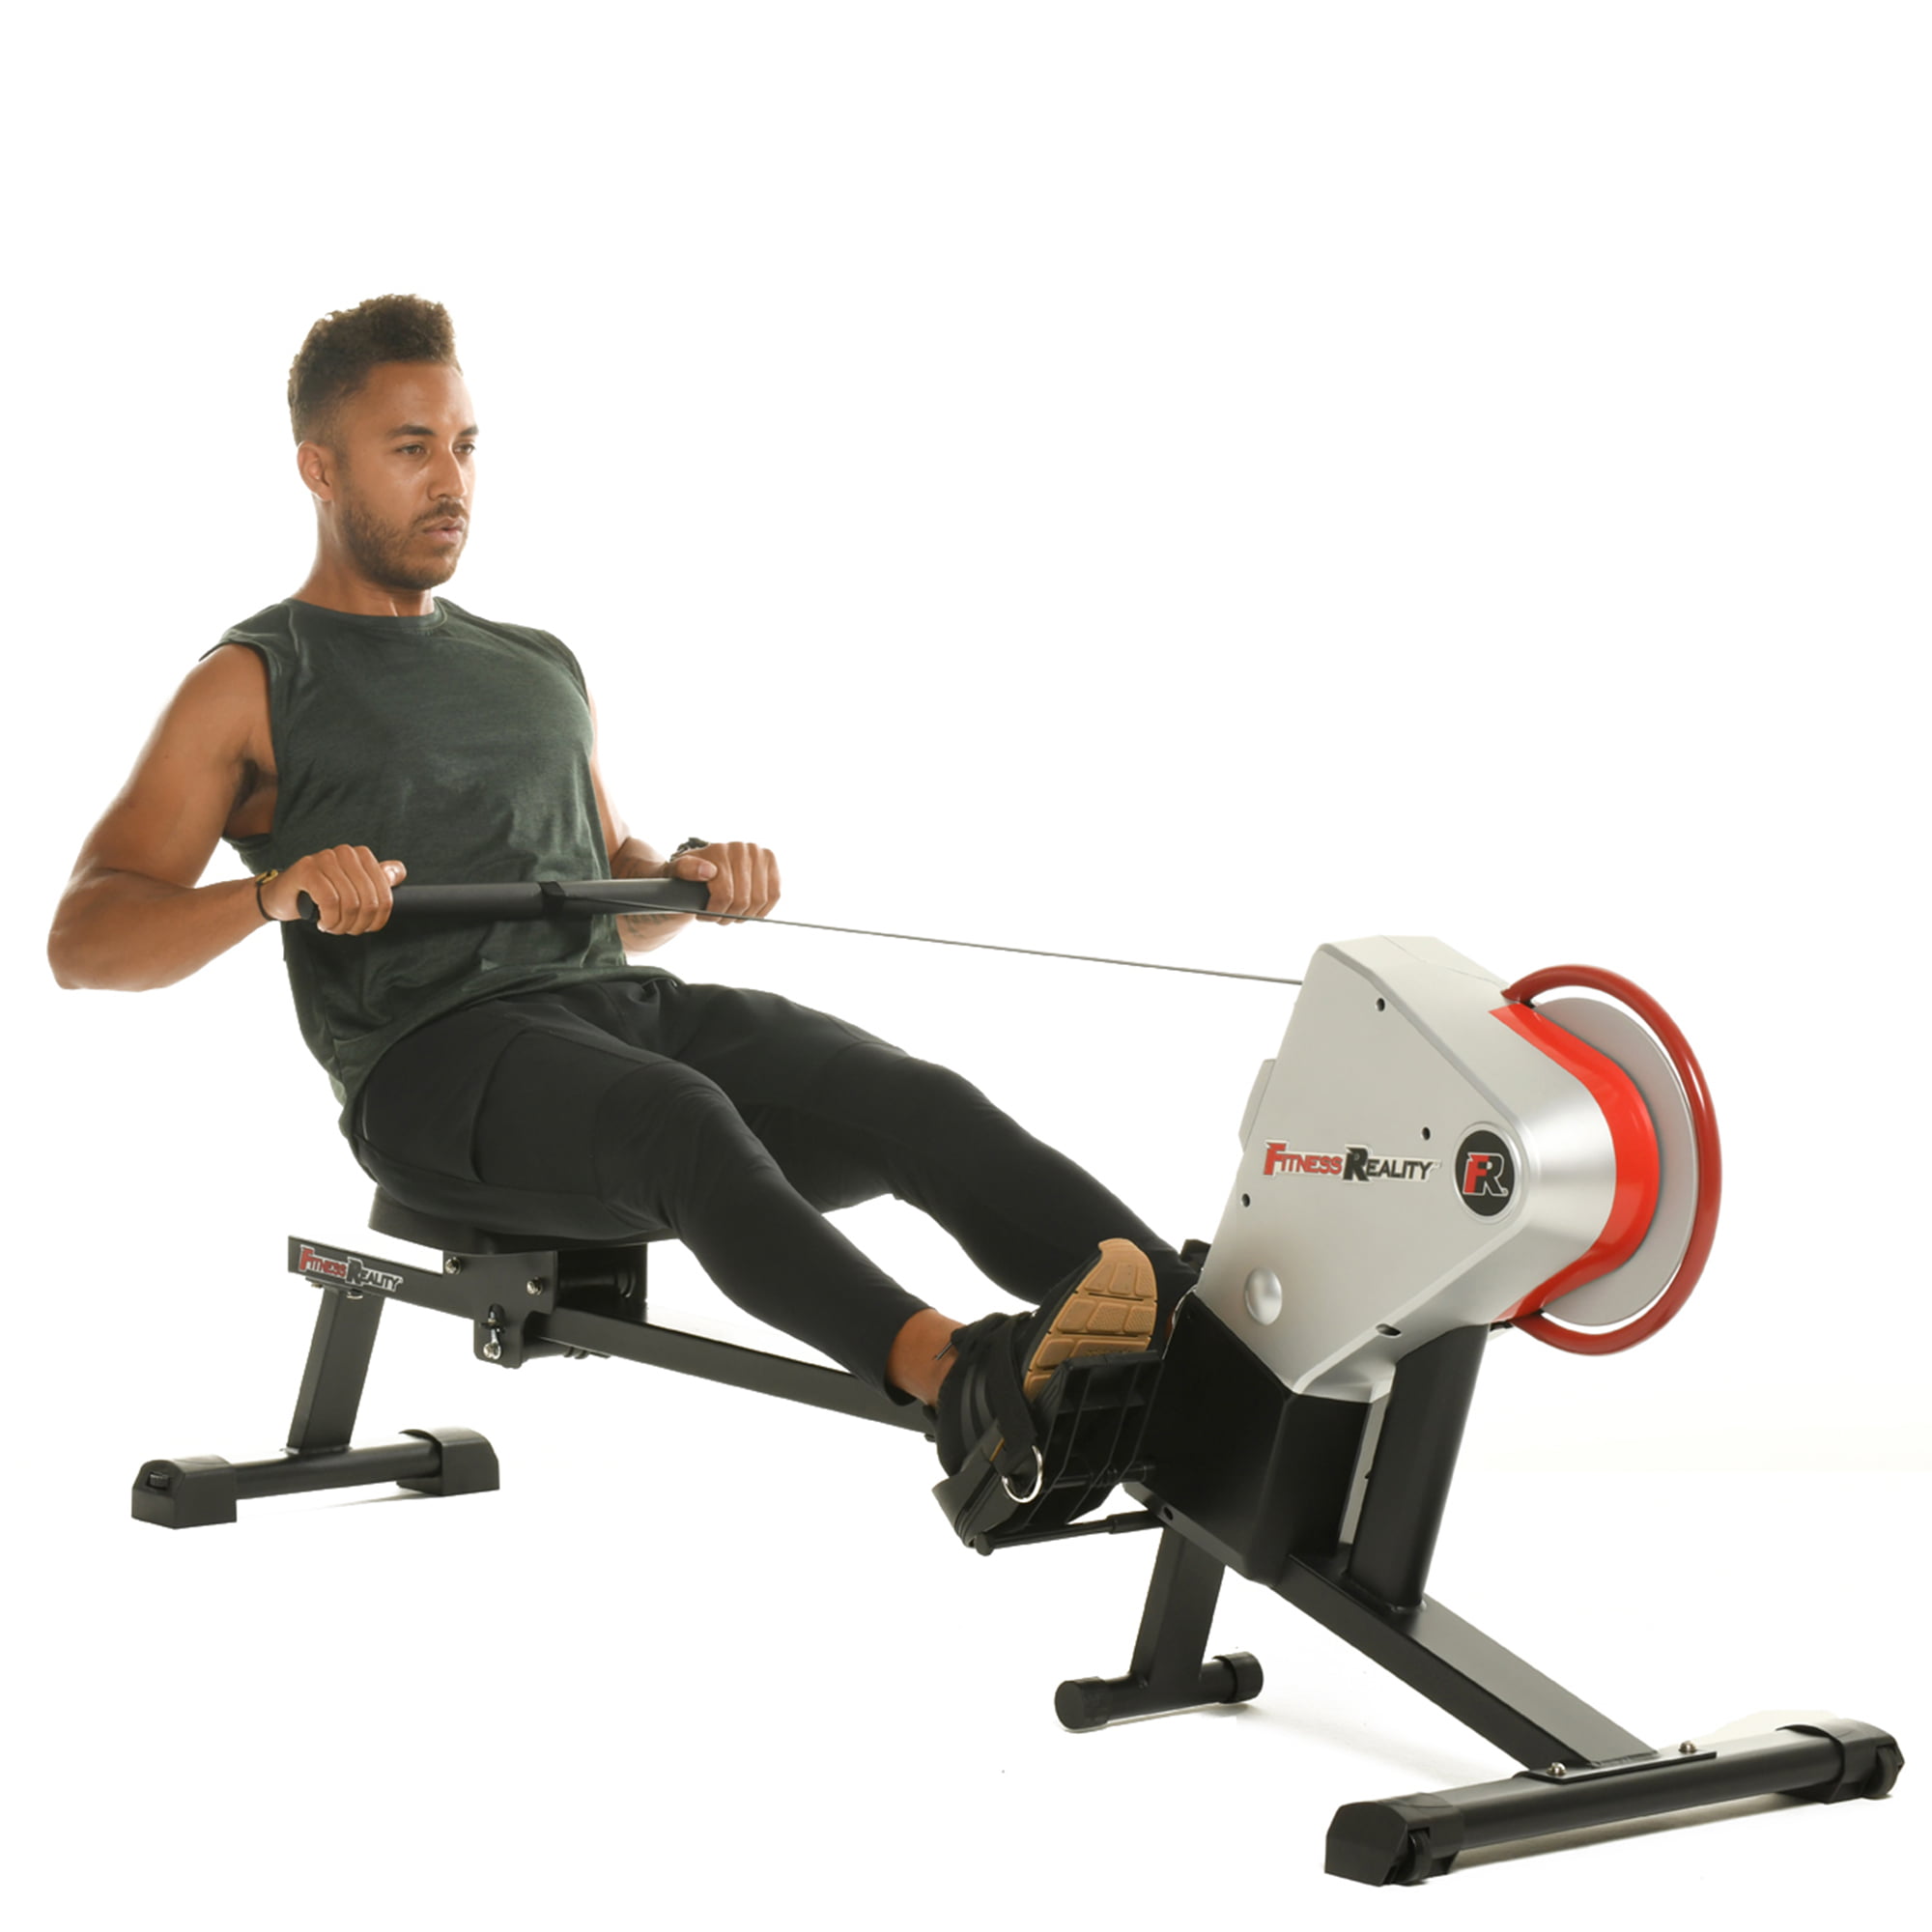 Fitness Reality 2000F Magnetic Rower Rowing Machine with 12 lb ...